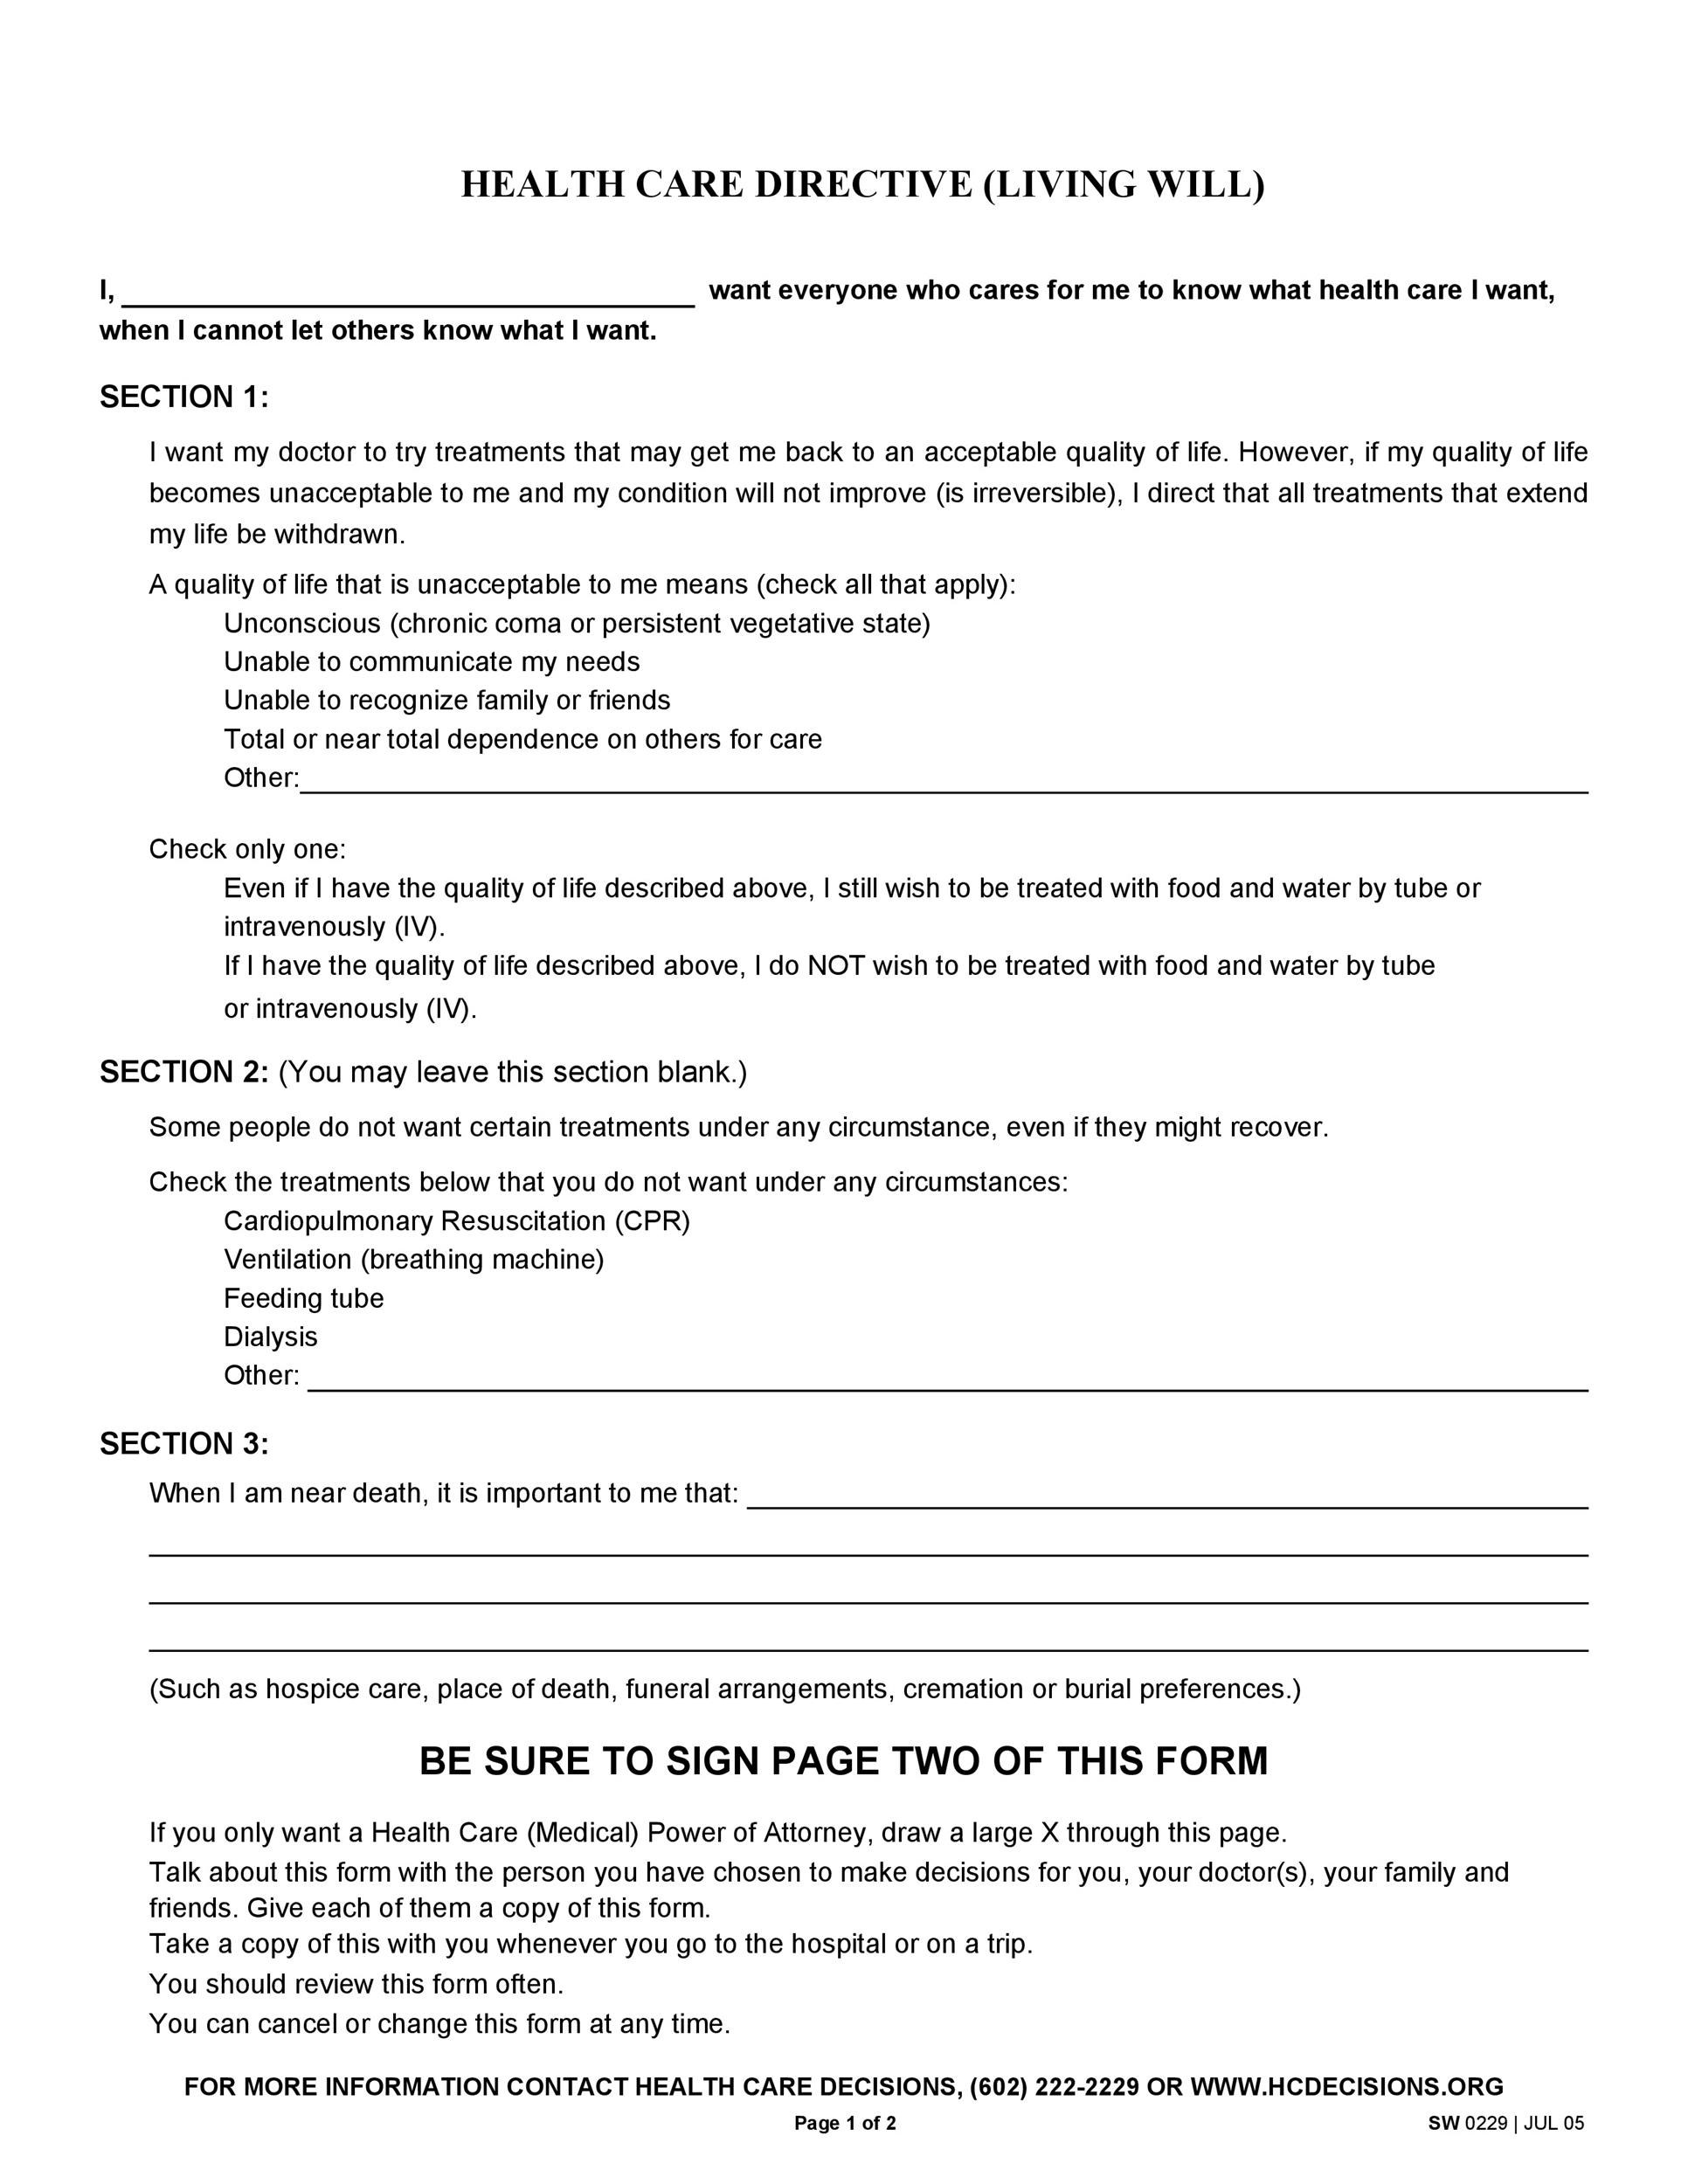 100-free-printable-living-will-forms-get-latest-free-printable